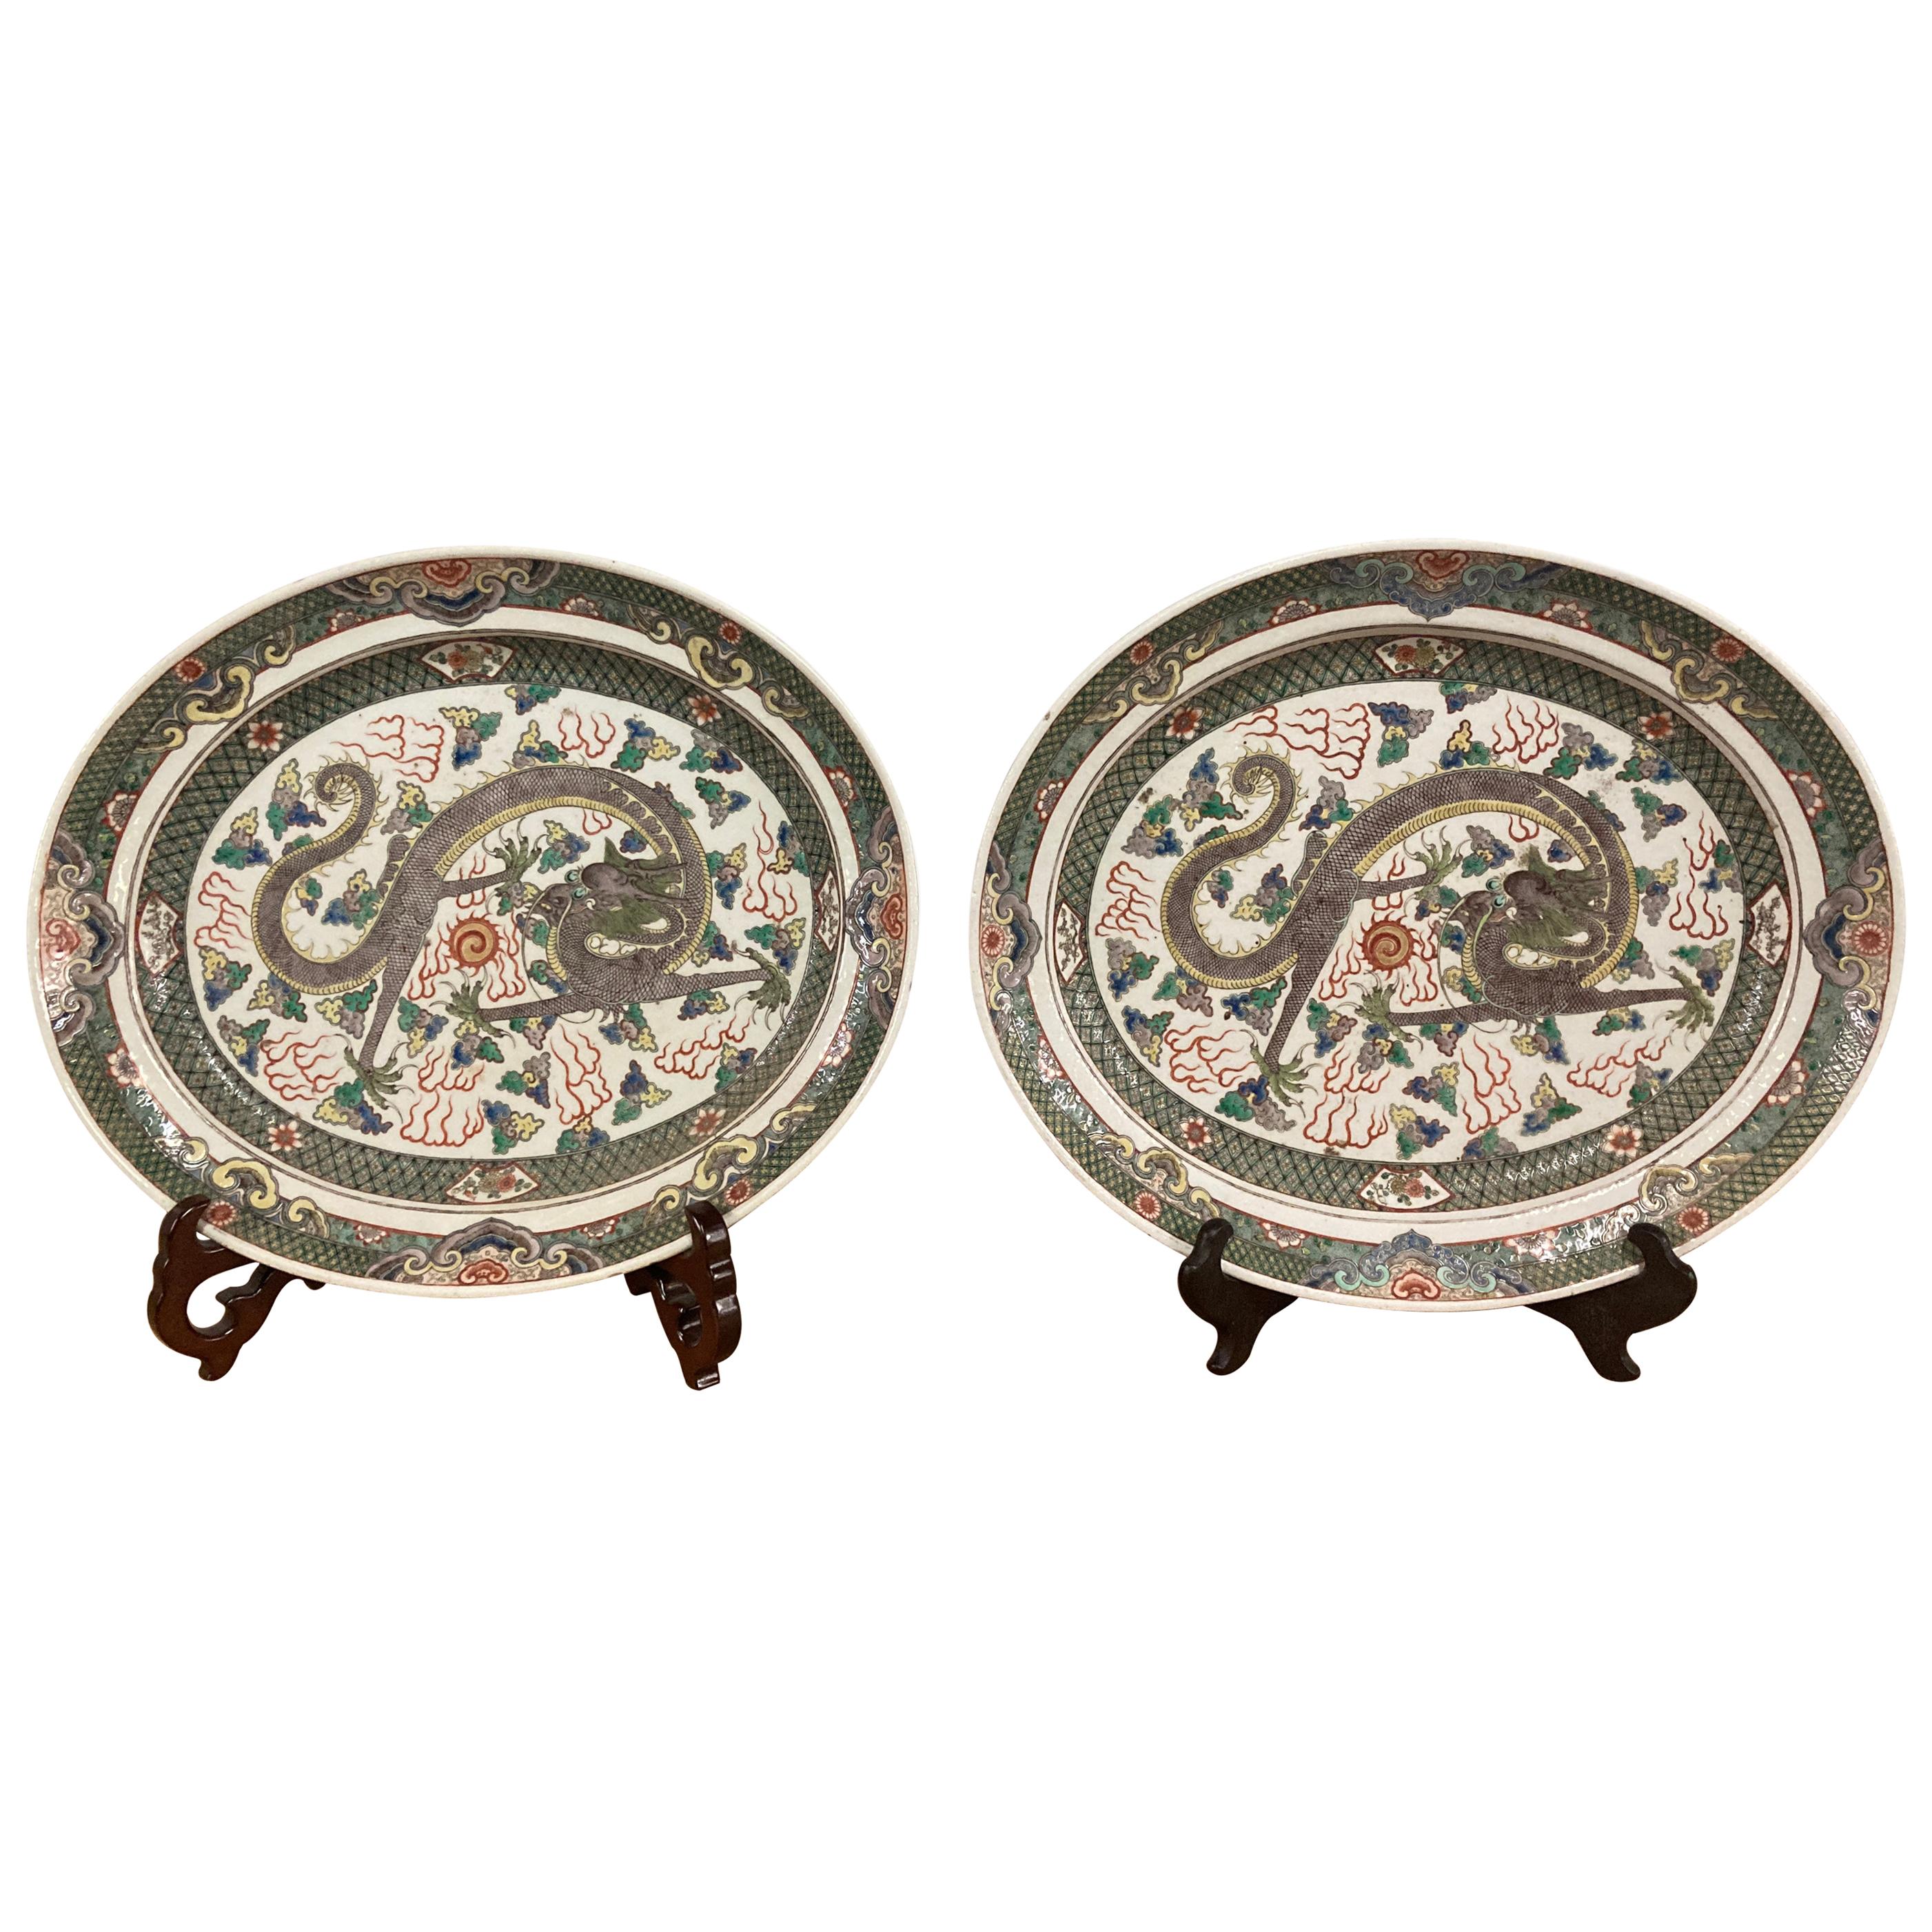 Large Pair of Chinese Export Famille Verte Platters from the Late 19th Century